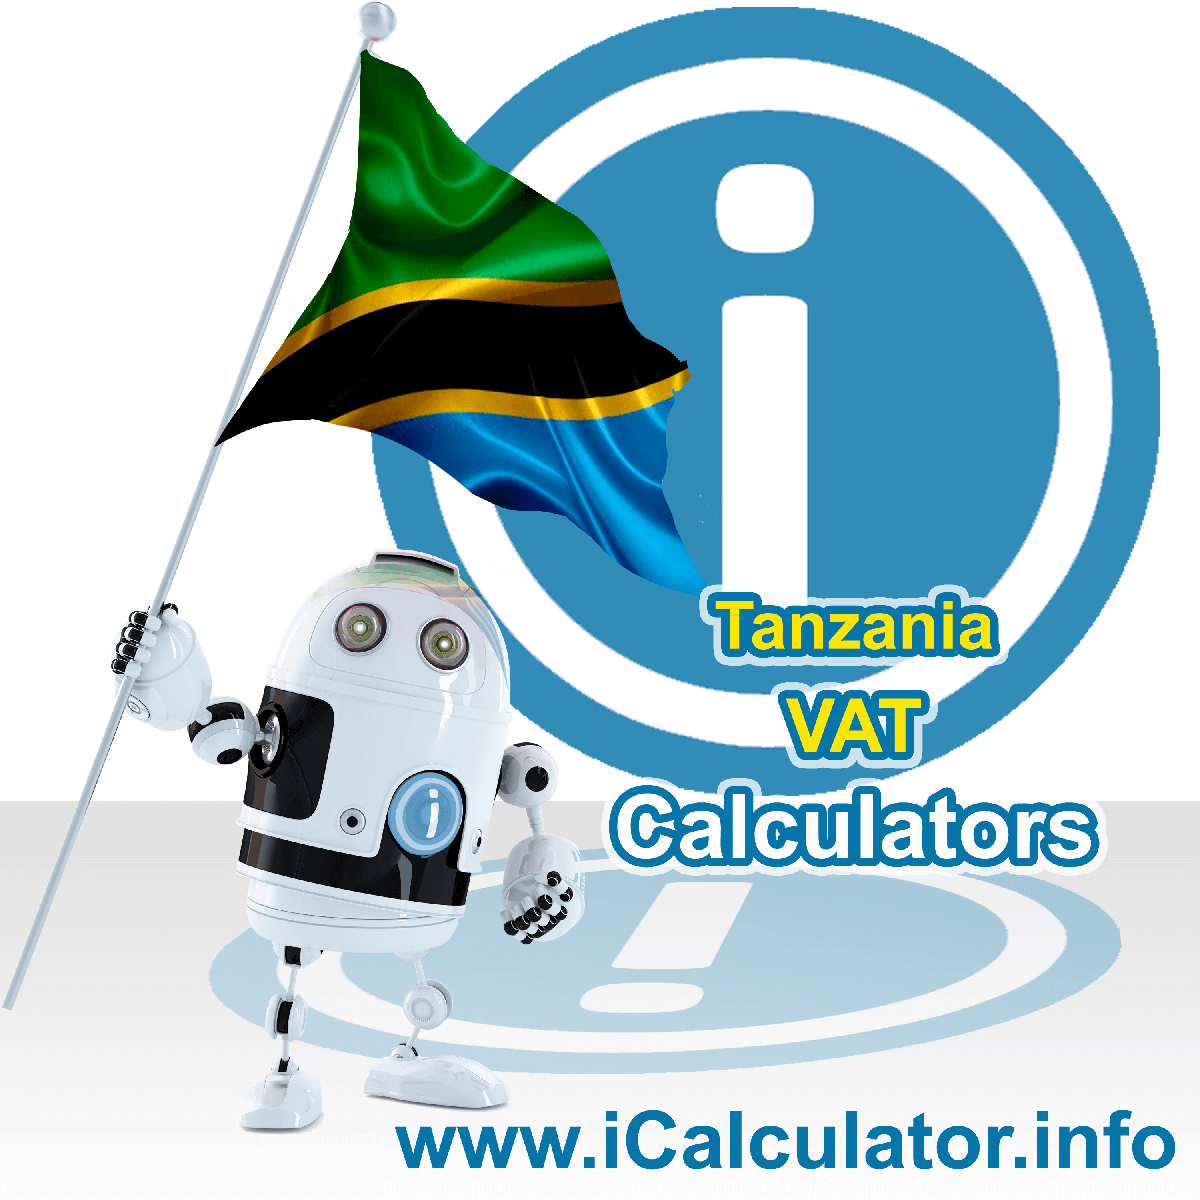 Tanzania VAT Calculator. This image shows the Tanzania flag and information relating to the VAT formula used for calculating Value Added Tax in Tanzania using the Tanzania VAT Calculator in 2022